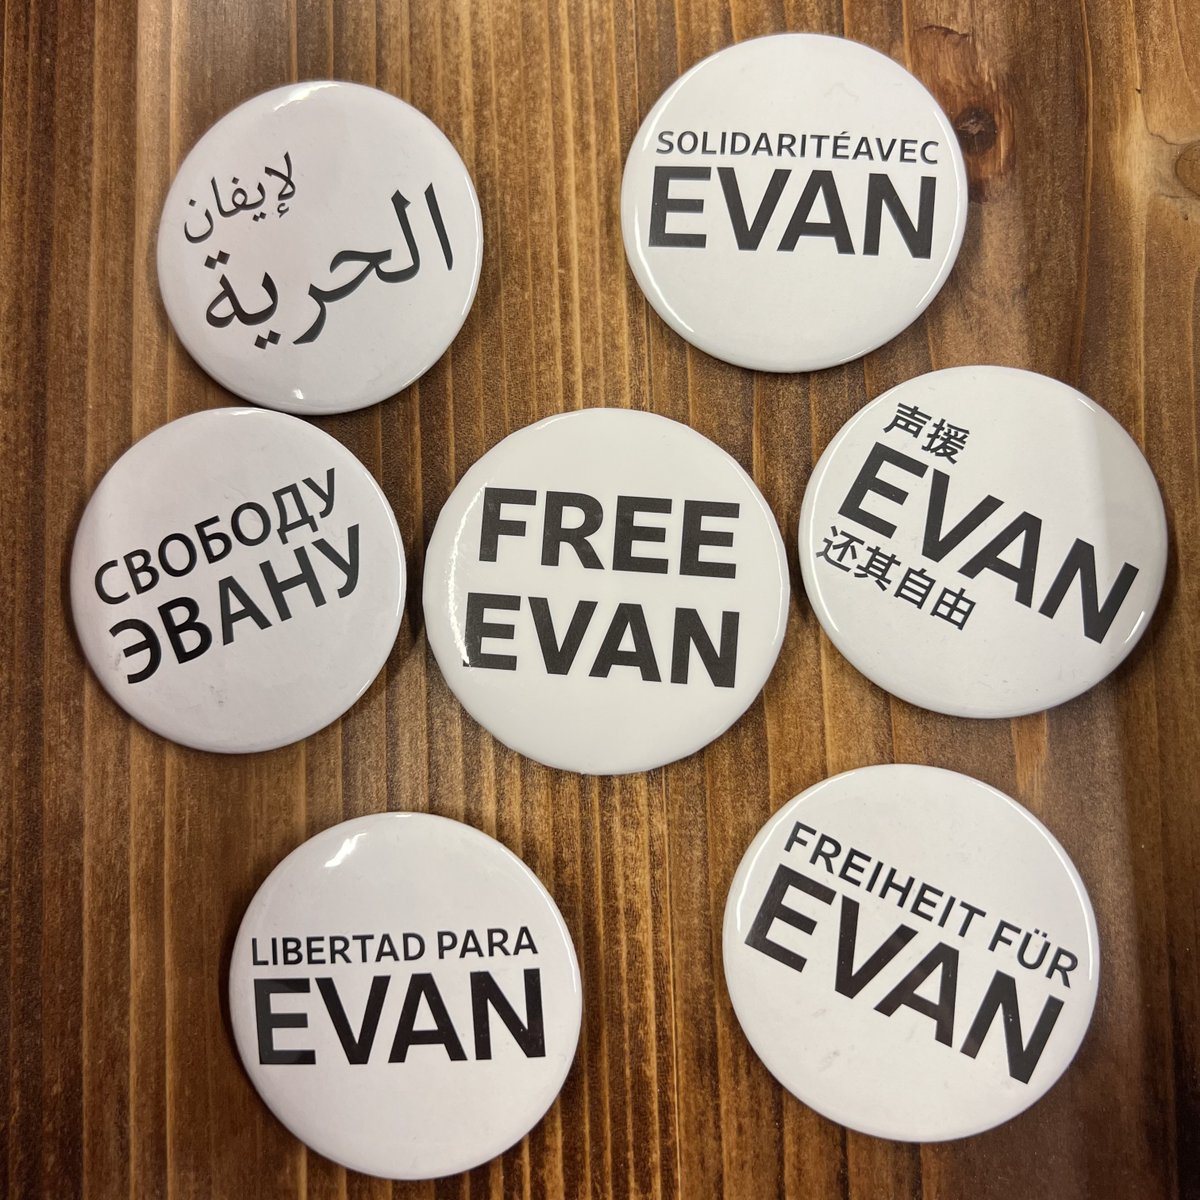 301 DAYS. WSJ reporter Evan Gershkovich has been in a Russian prison for 301 days. I can't believe it's been that long. I'm sure he feels every day of it. Please help us continue to share his story wsj.com/evan #FreeEvan #IStandWithEvan #JournalismIsNotaCrime